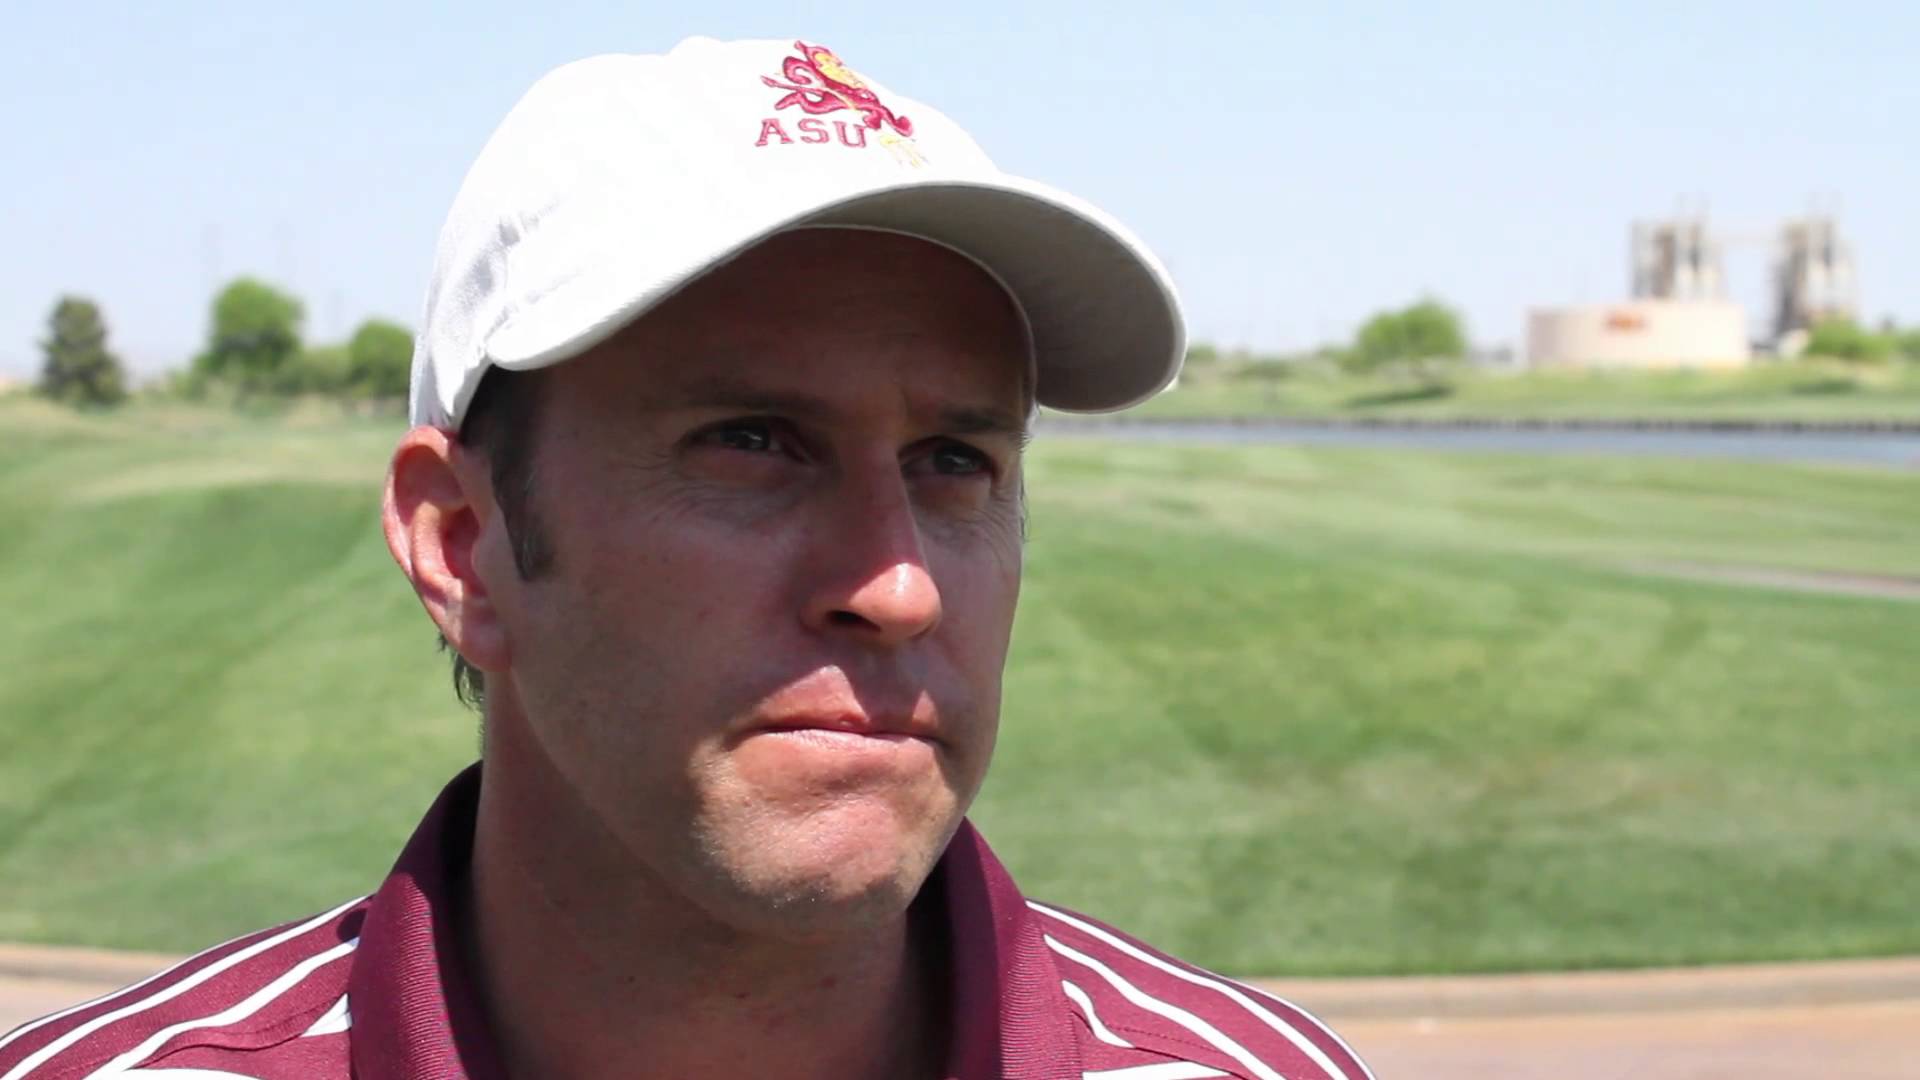 Catching up with Arizona State men's golf coach Tim Mickelson